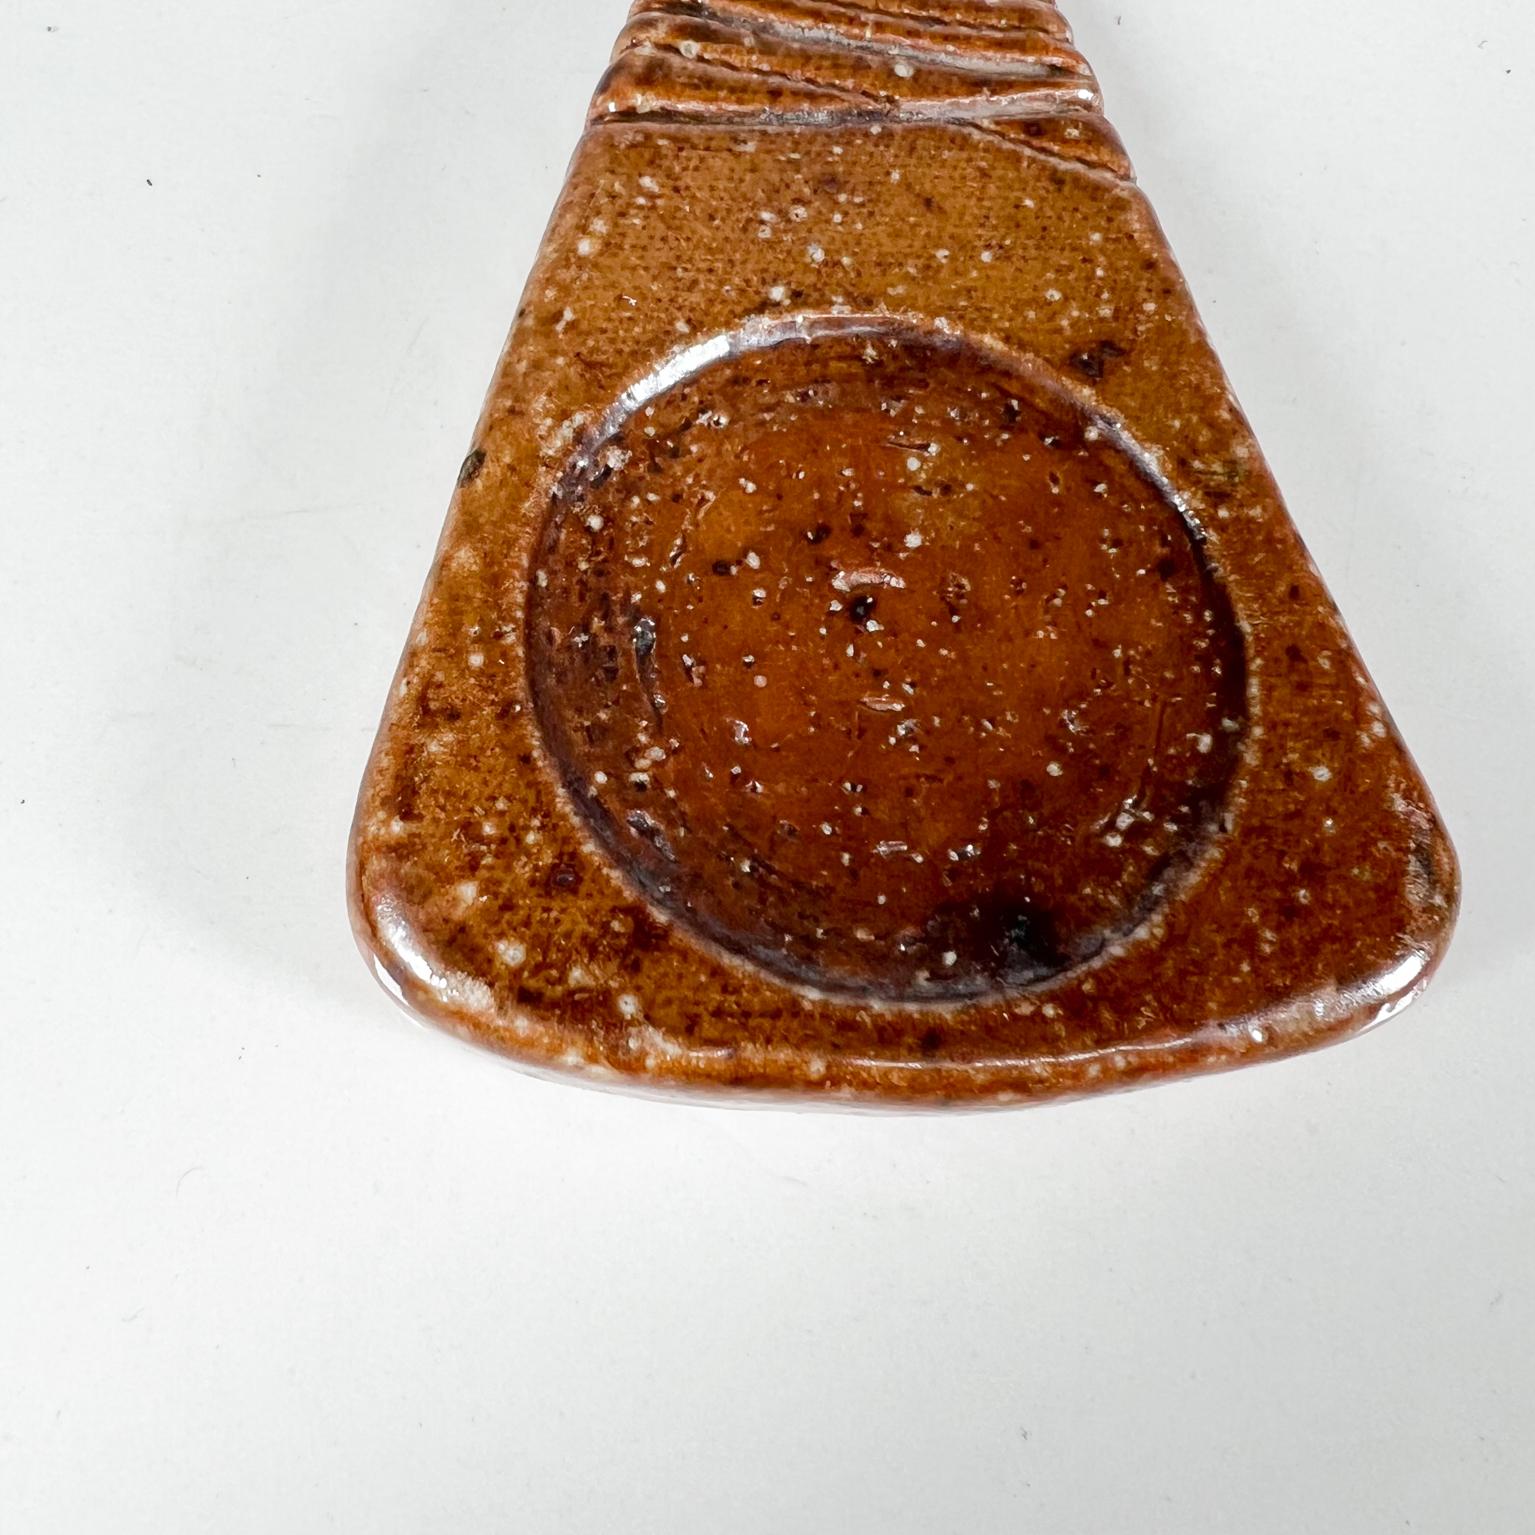 1980s Modern Speckled Brown Dish Glazed Pottery Art In Good Condition For Sale In Chula Vista, CA